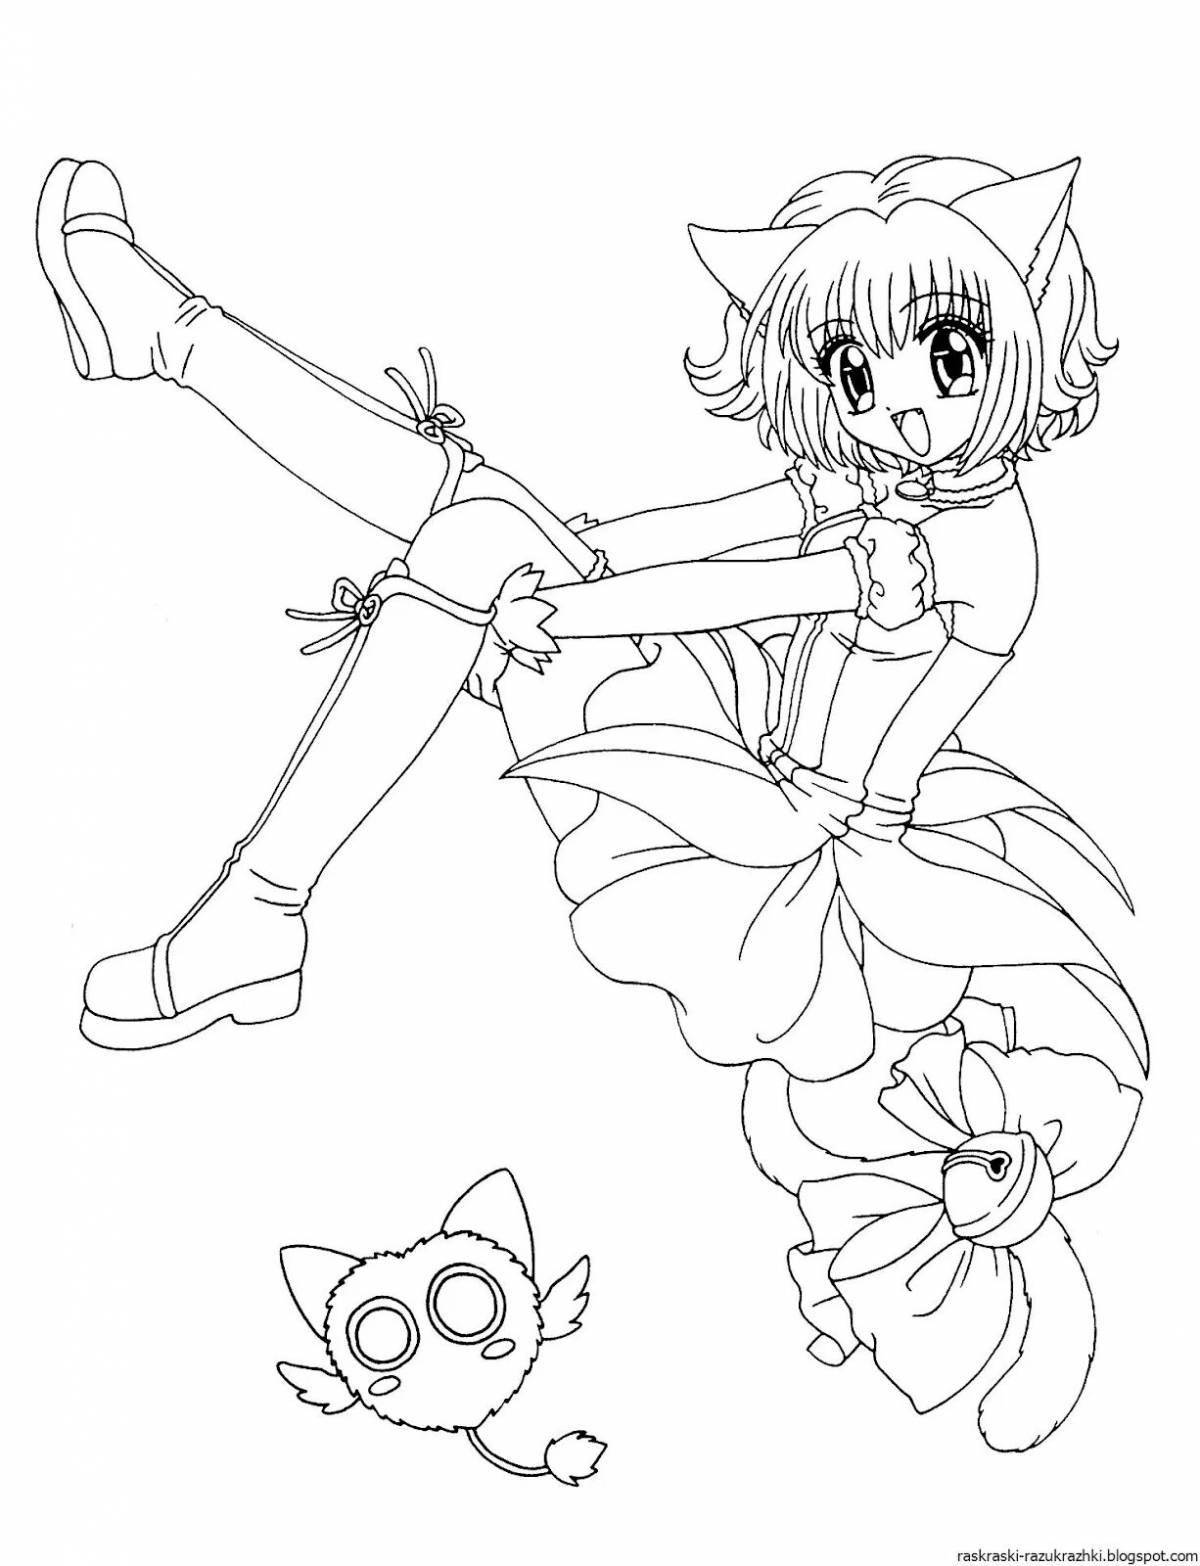 Animated coloring pages for girls anime cats